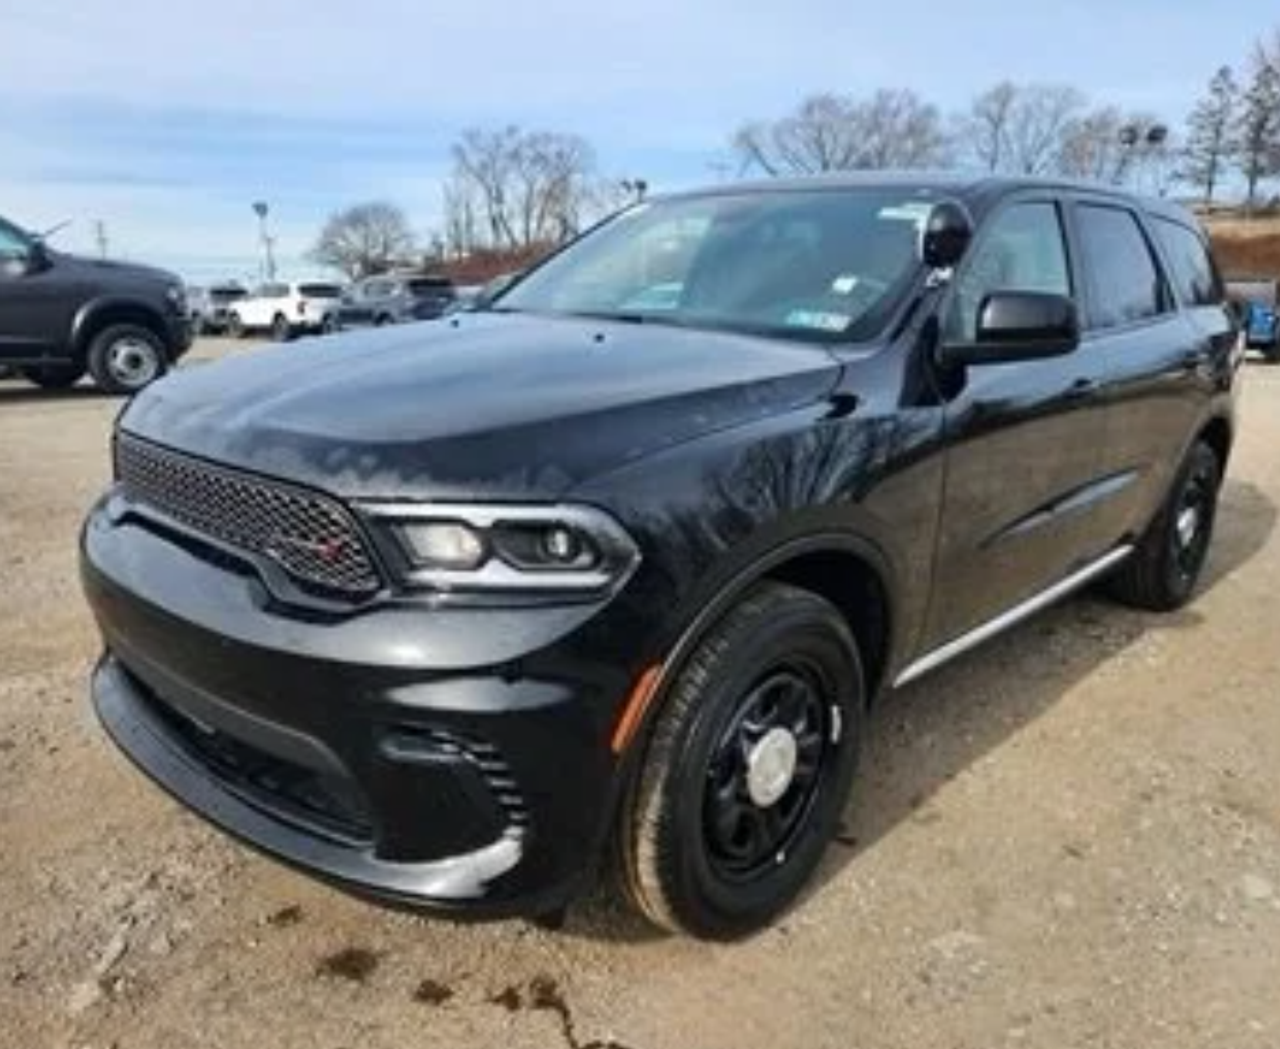 New 2023 Black Dodge Durango PPV V6 Police Package SUV AWD, ready to be built as a Marked Patrol Package (Emergency Lighting, Siren, Controller,  Console, Partition, etc.), + Delivery, DURMP6B3